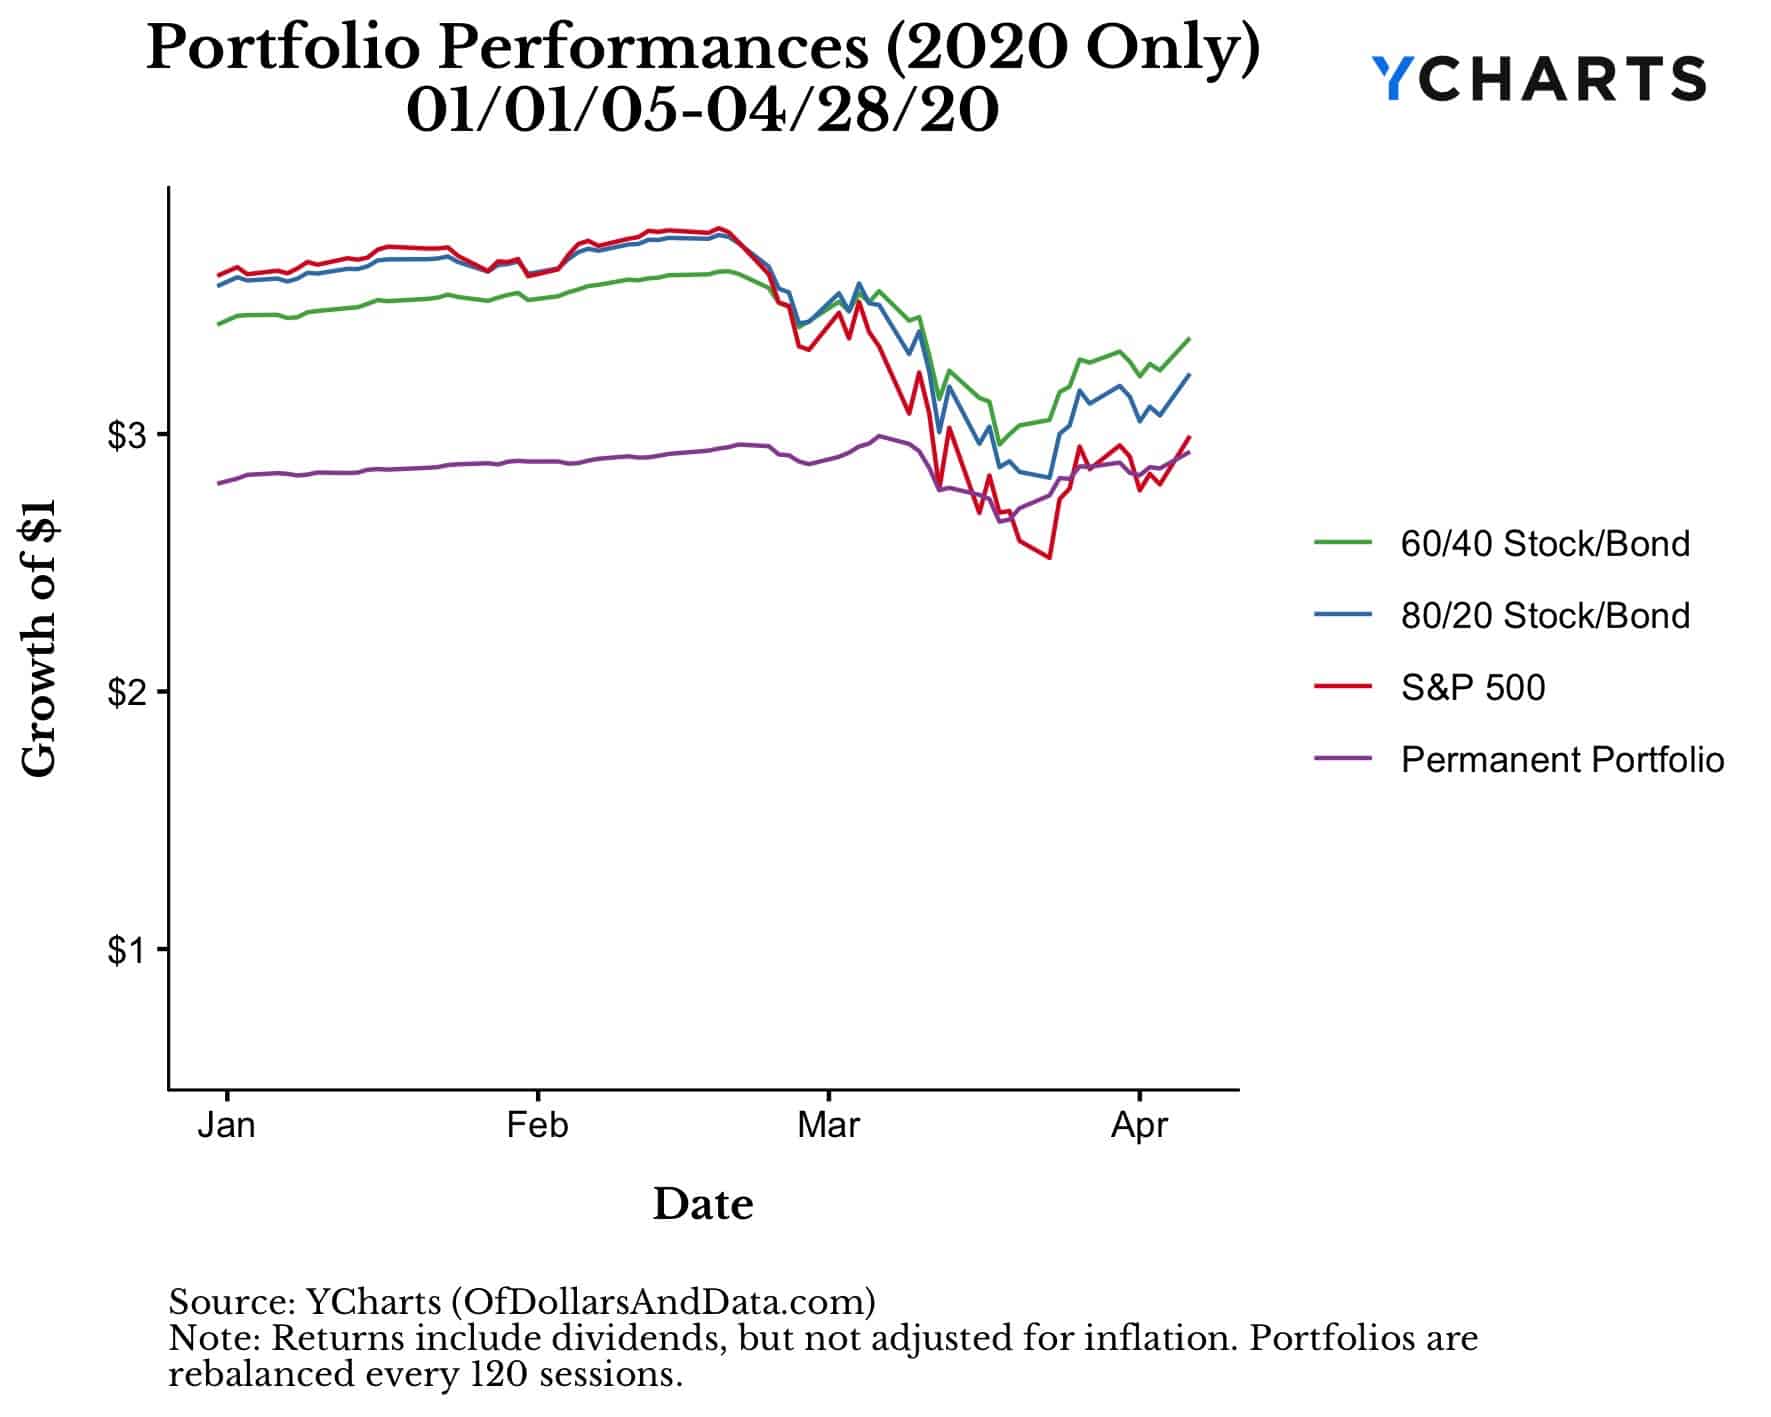 Performance for the Permanent Portfolio, 60/40, 80/20, and the S&P 500 in early 2020 only